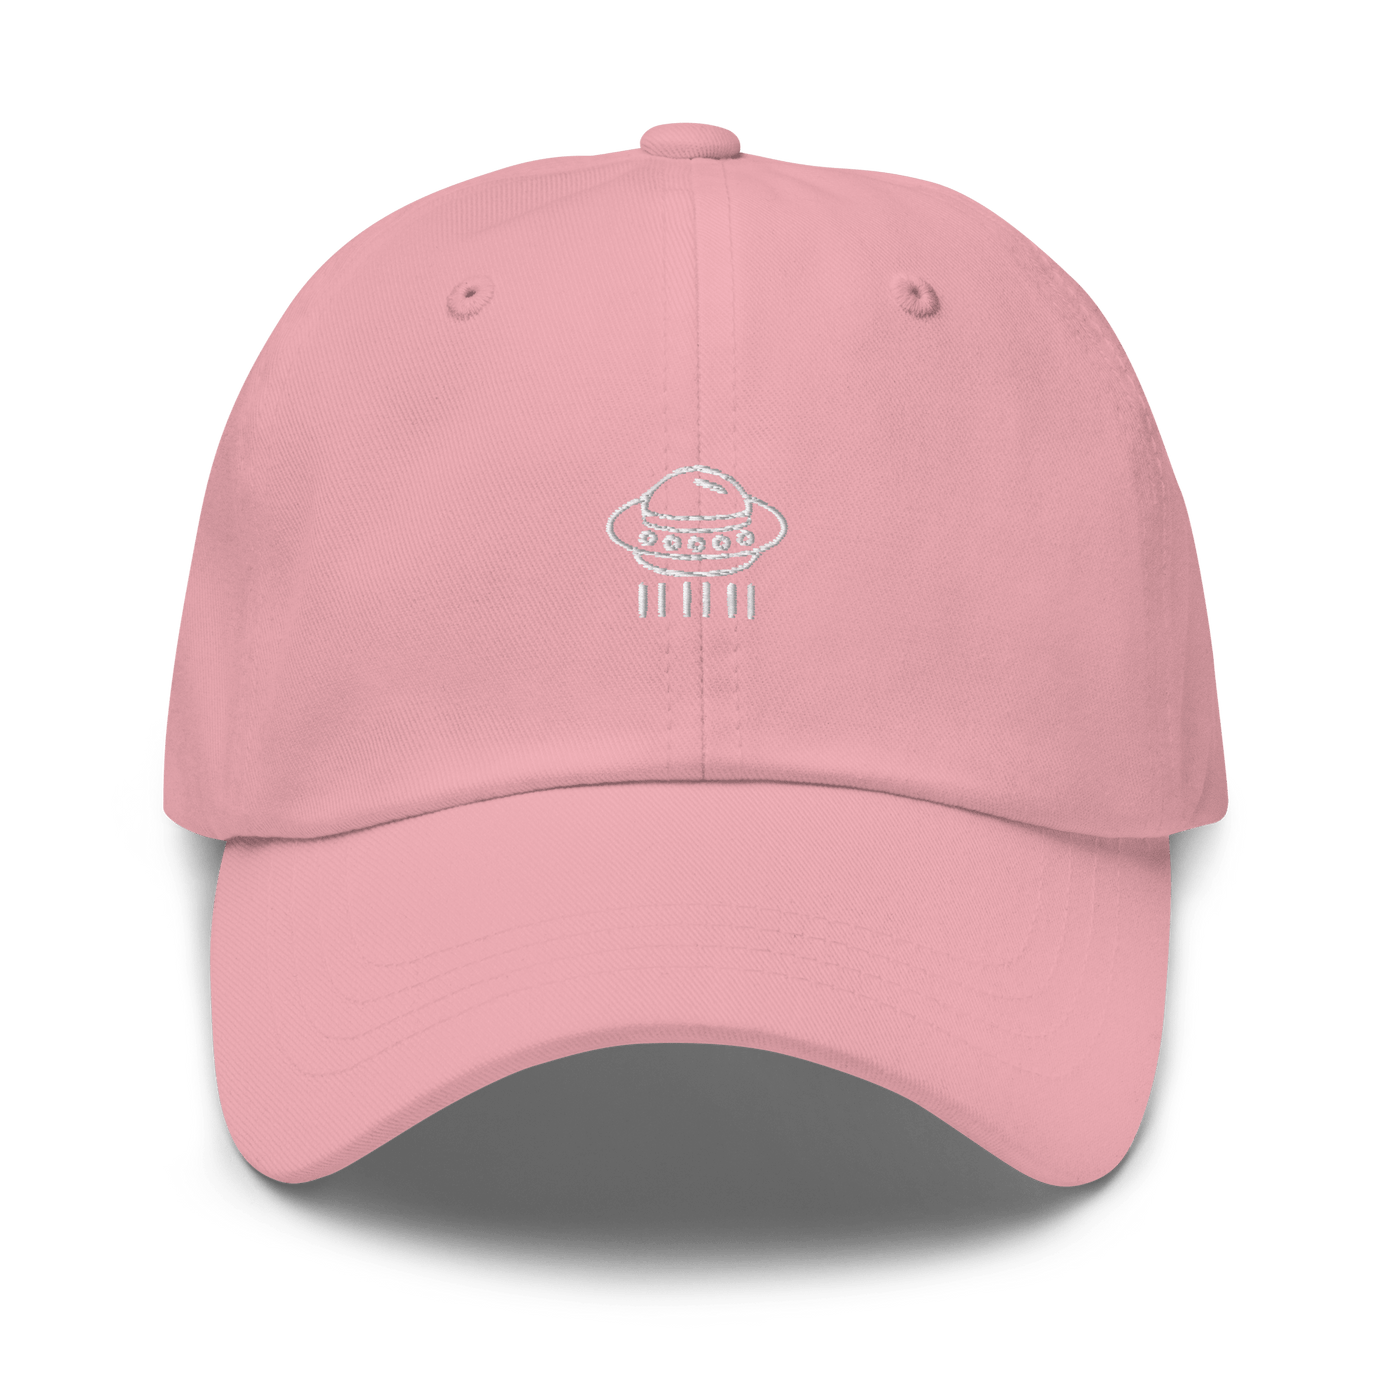 UFO Dad hat - Pink - - Just Another Cap Store